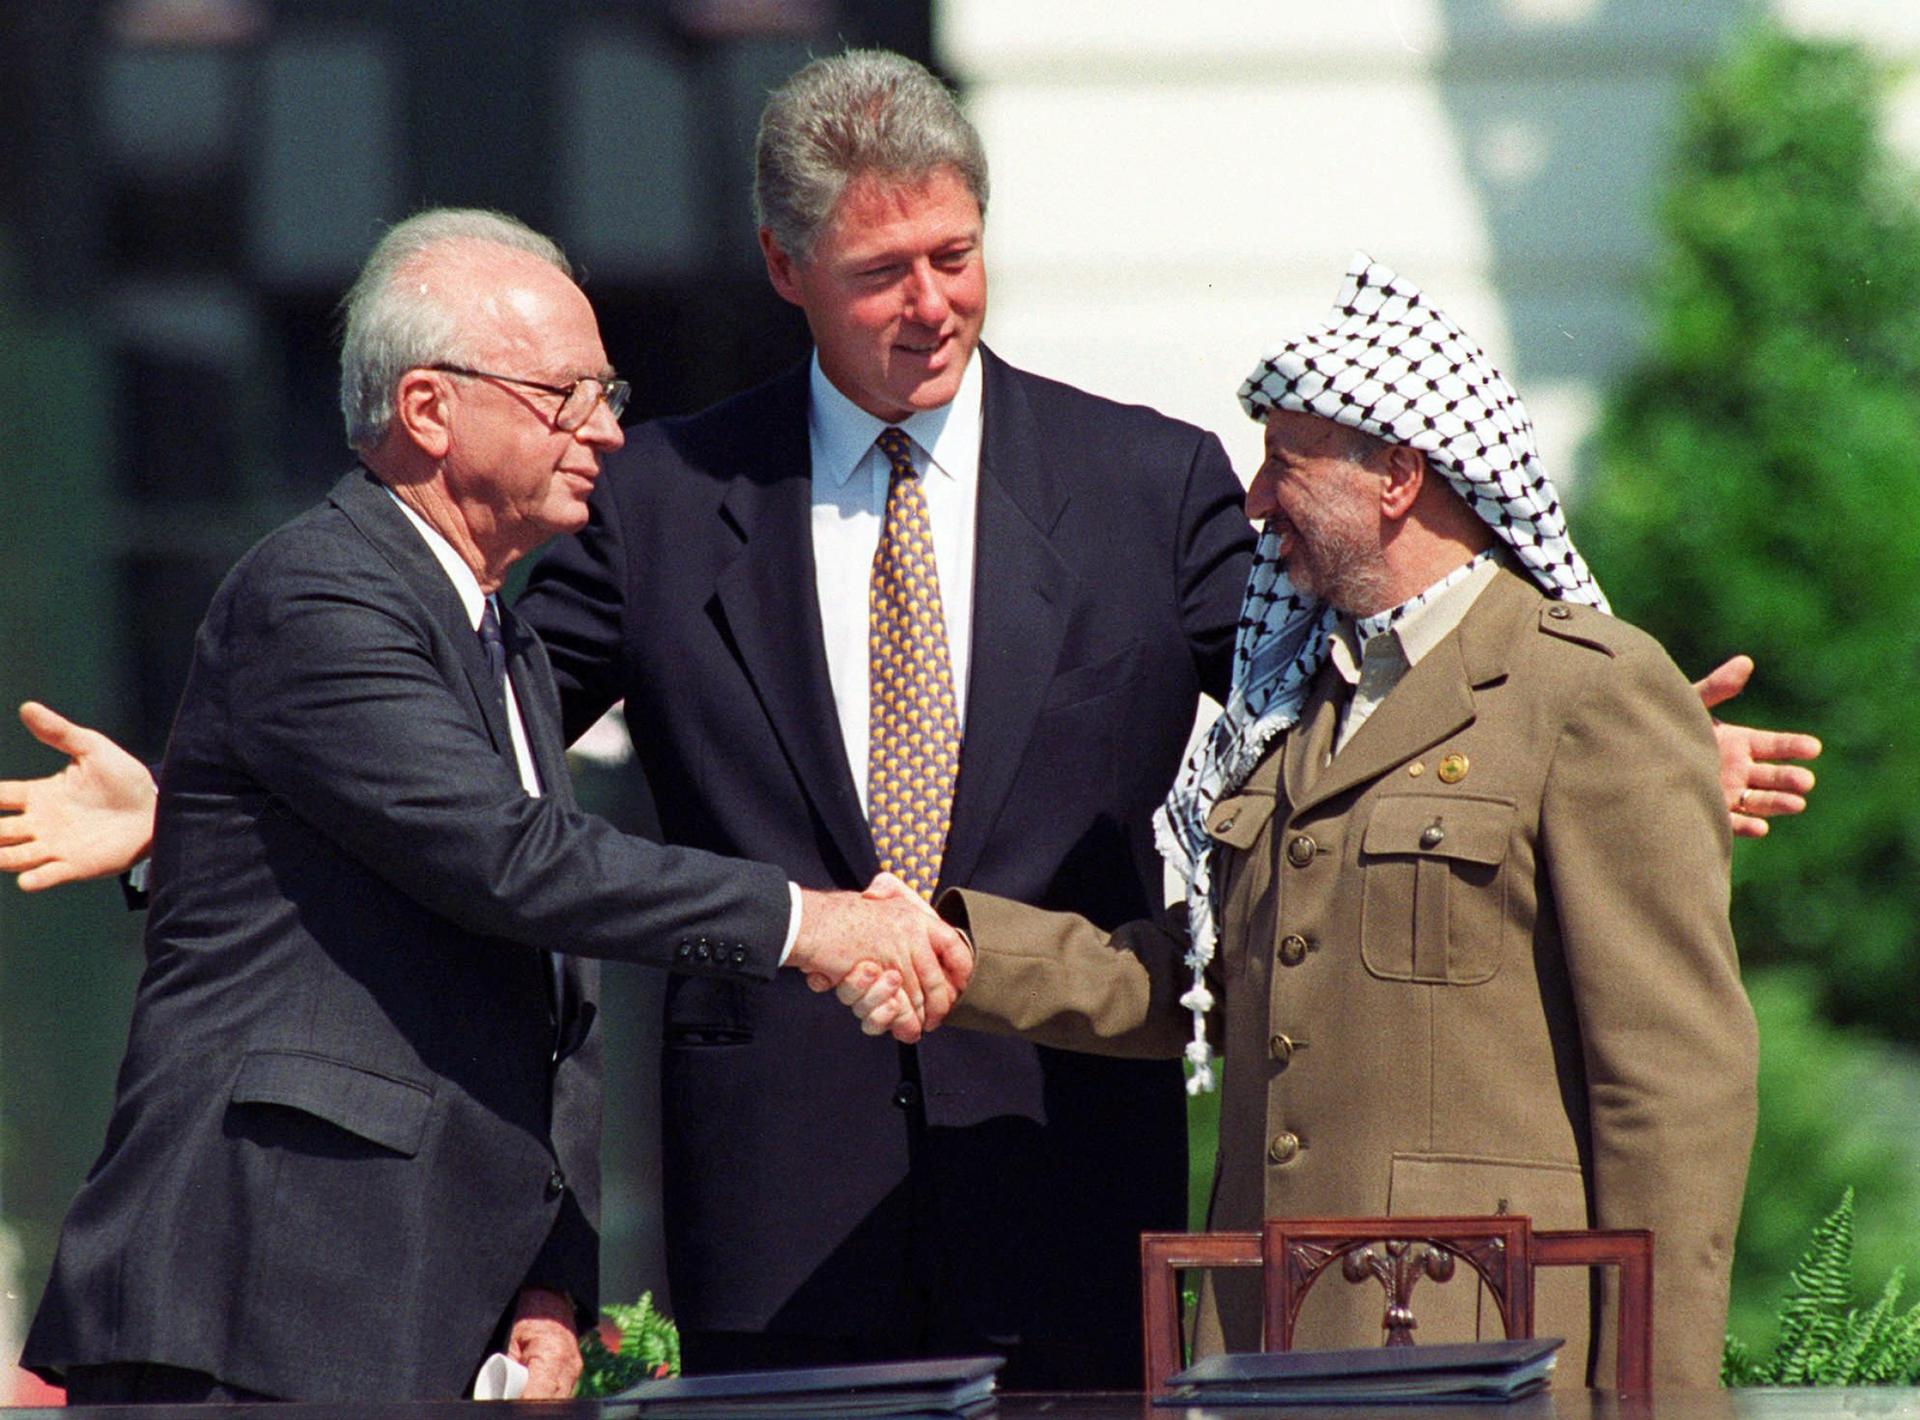 Israeli Prime Minister Yitzhak Rabin, left, and Palestinian leader Yasser Arafat shake hands marking the signing of the peace accord between Israel and the Palestinians, in Washington, Sept. 13, 1993.